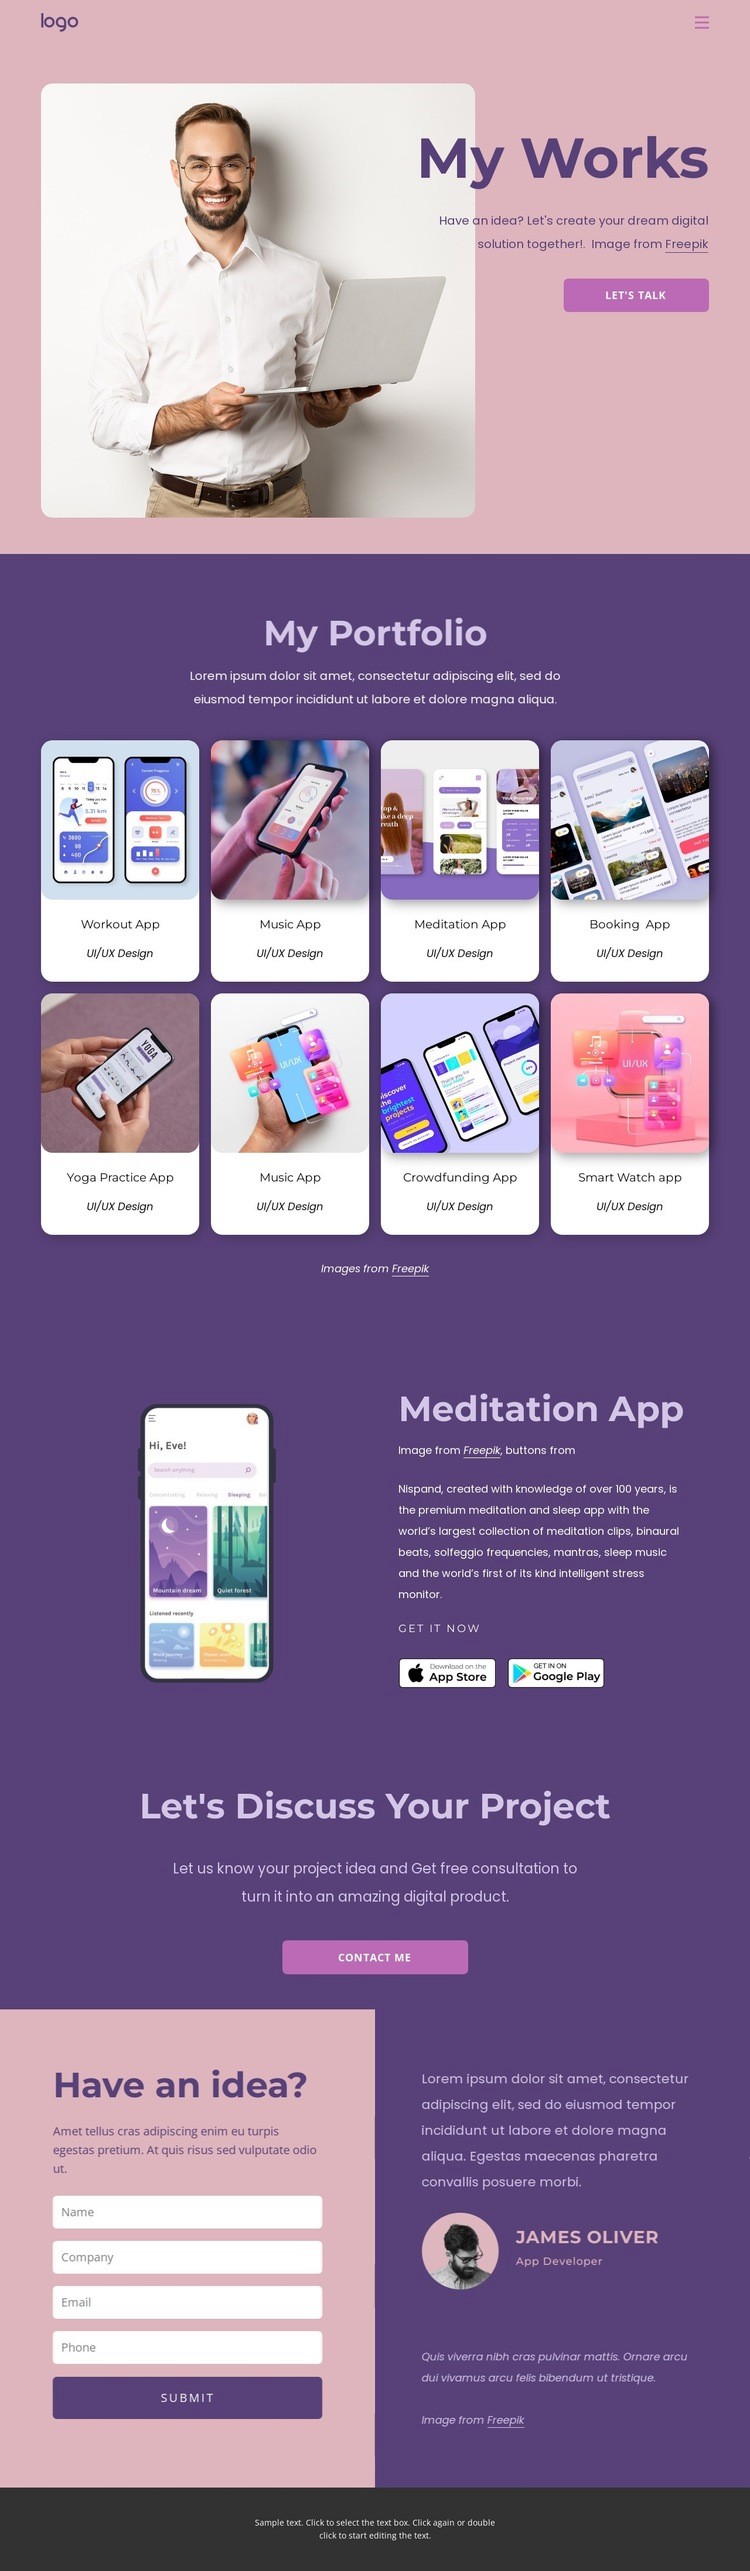 Custom iOS and Android apps for your business Squarespace Template Alternative